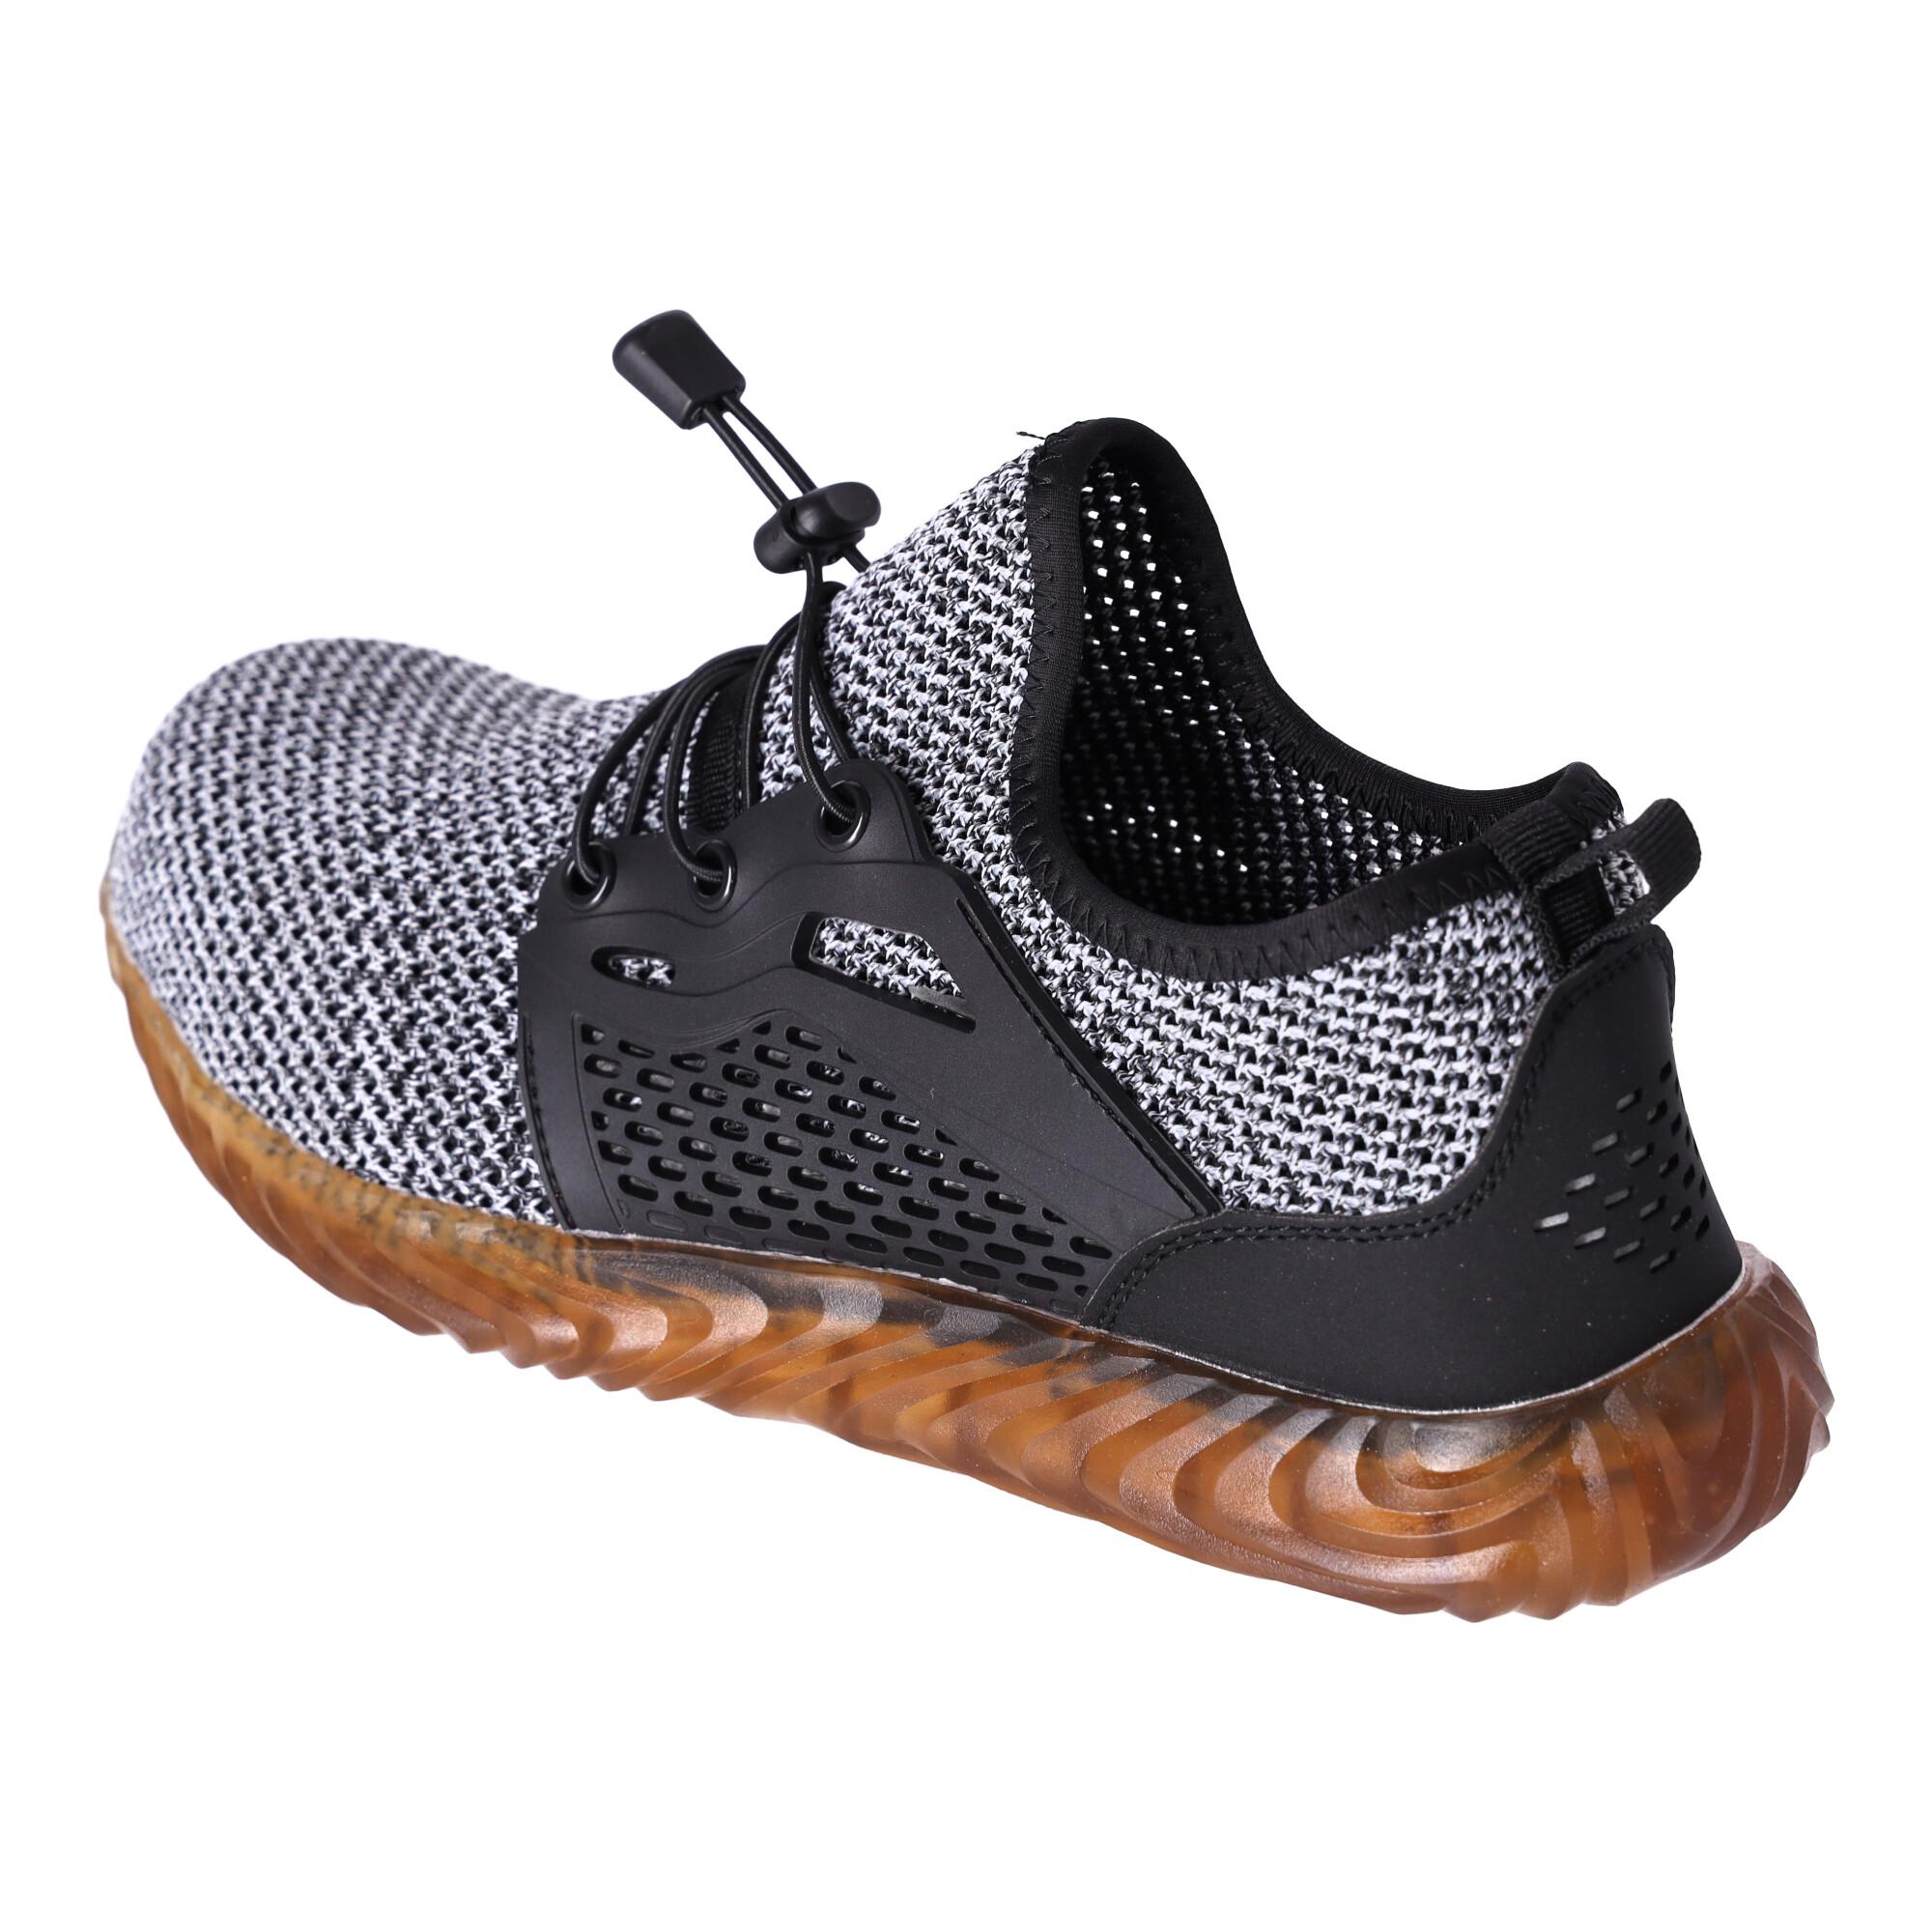 Work safety shoes Soft "40" - gray